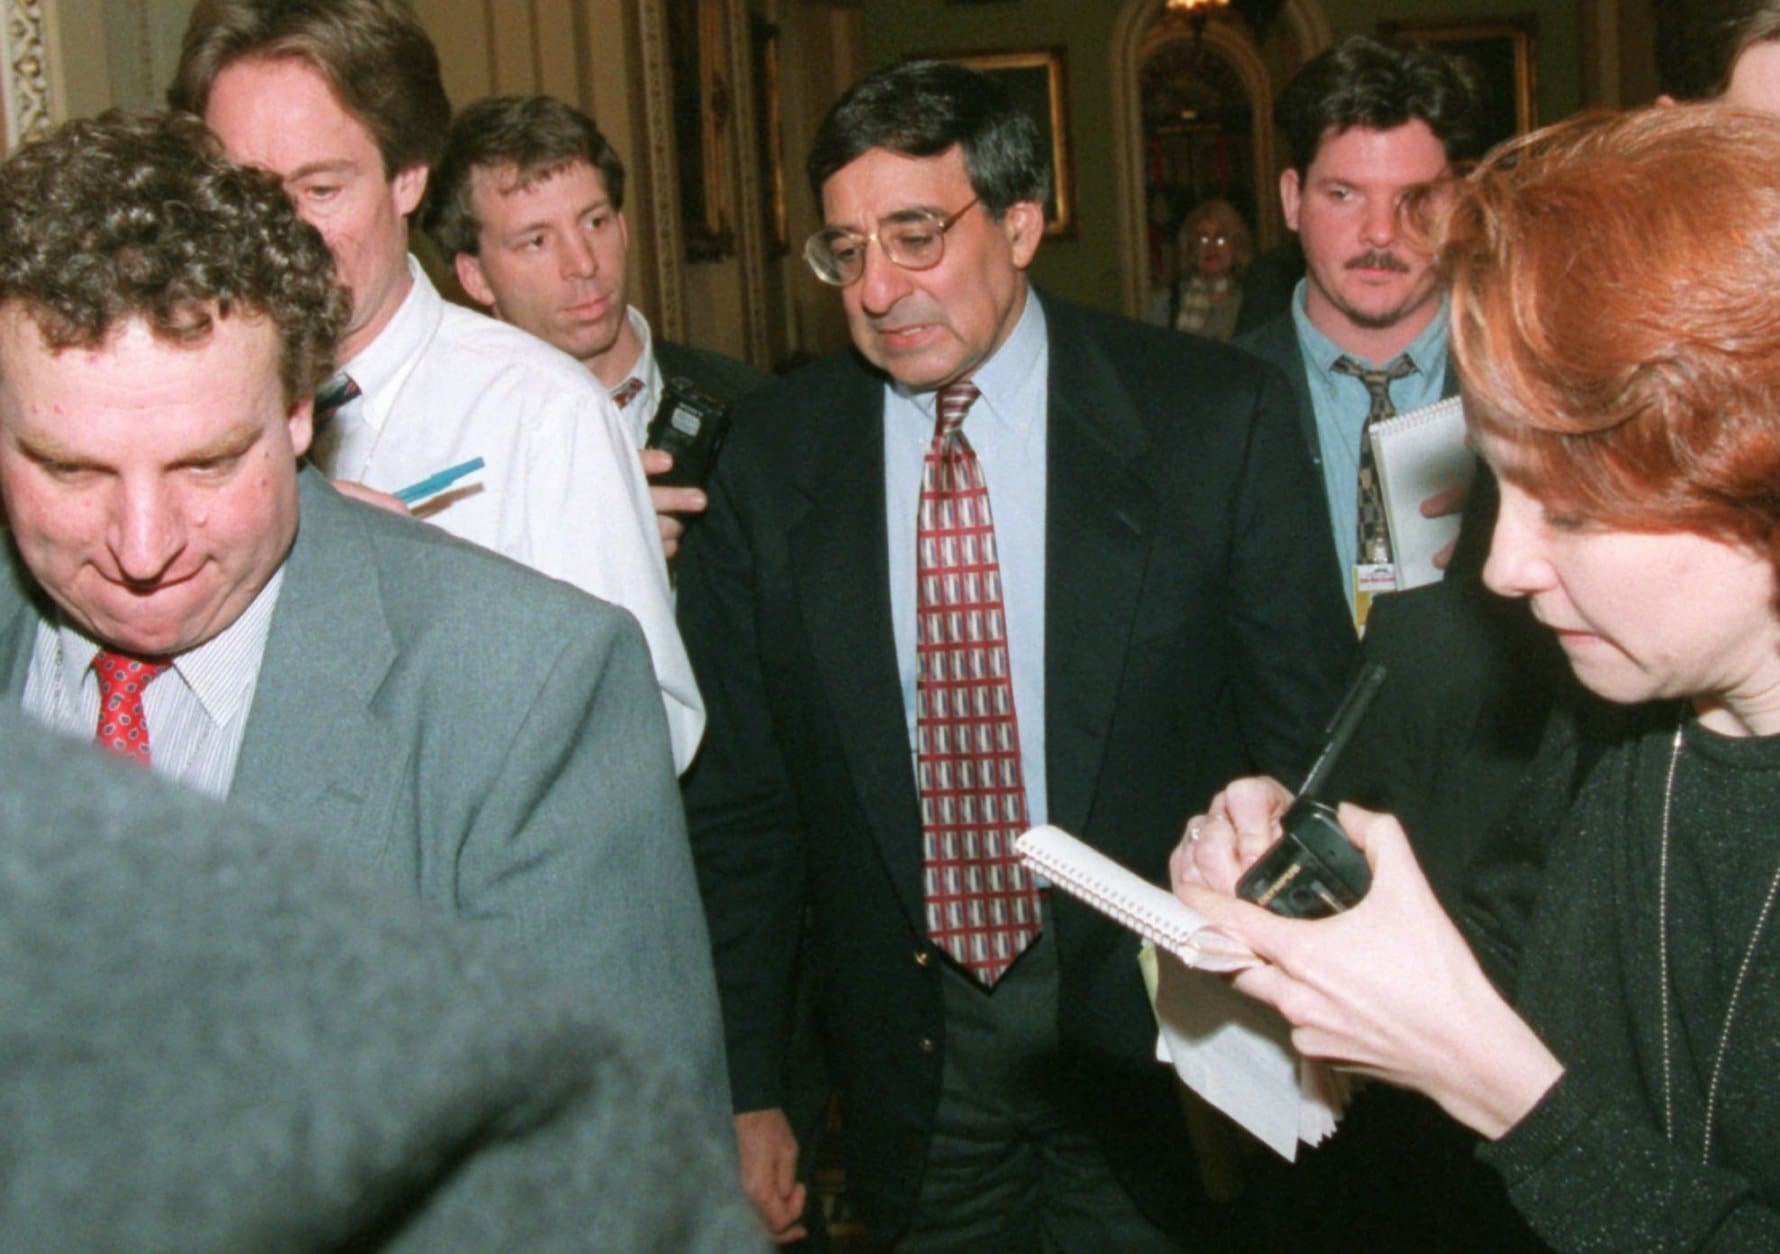 White House Chief of Staff Leon Panetta walks through the Capitol amid reporters Thursday Dec. 21, 1995 after budget talks broke up for the day. Bipartisan budget talks sprang back to life Thursday, but Democrats threatened to cut them off again if Republicans don't swiftly send President Clinton a bill ending the six-day government shutdown.(AP Photo/Wilfredo Lee)